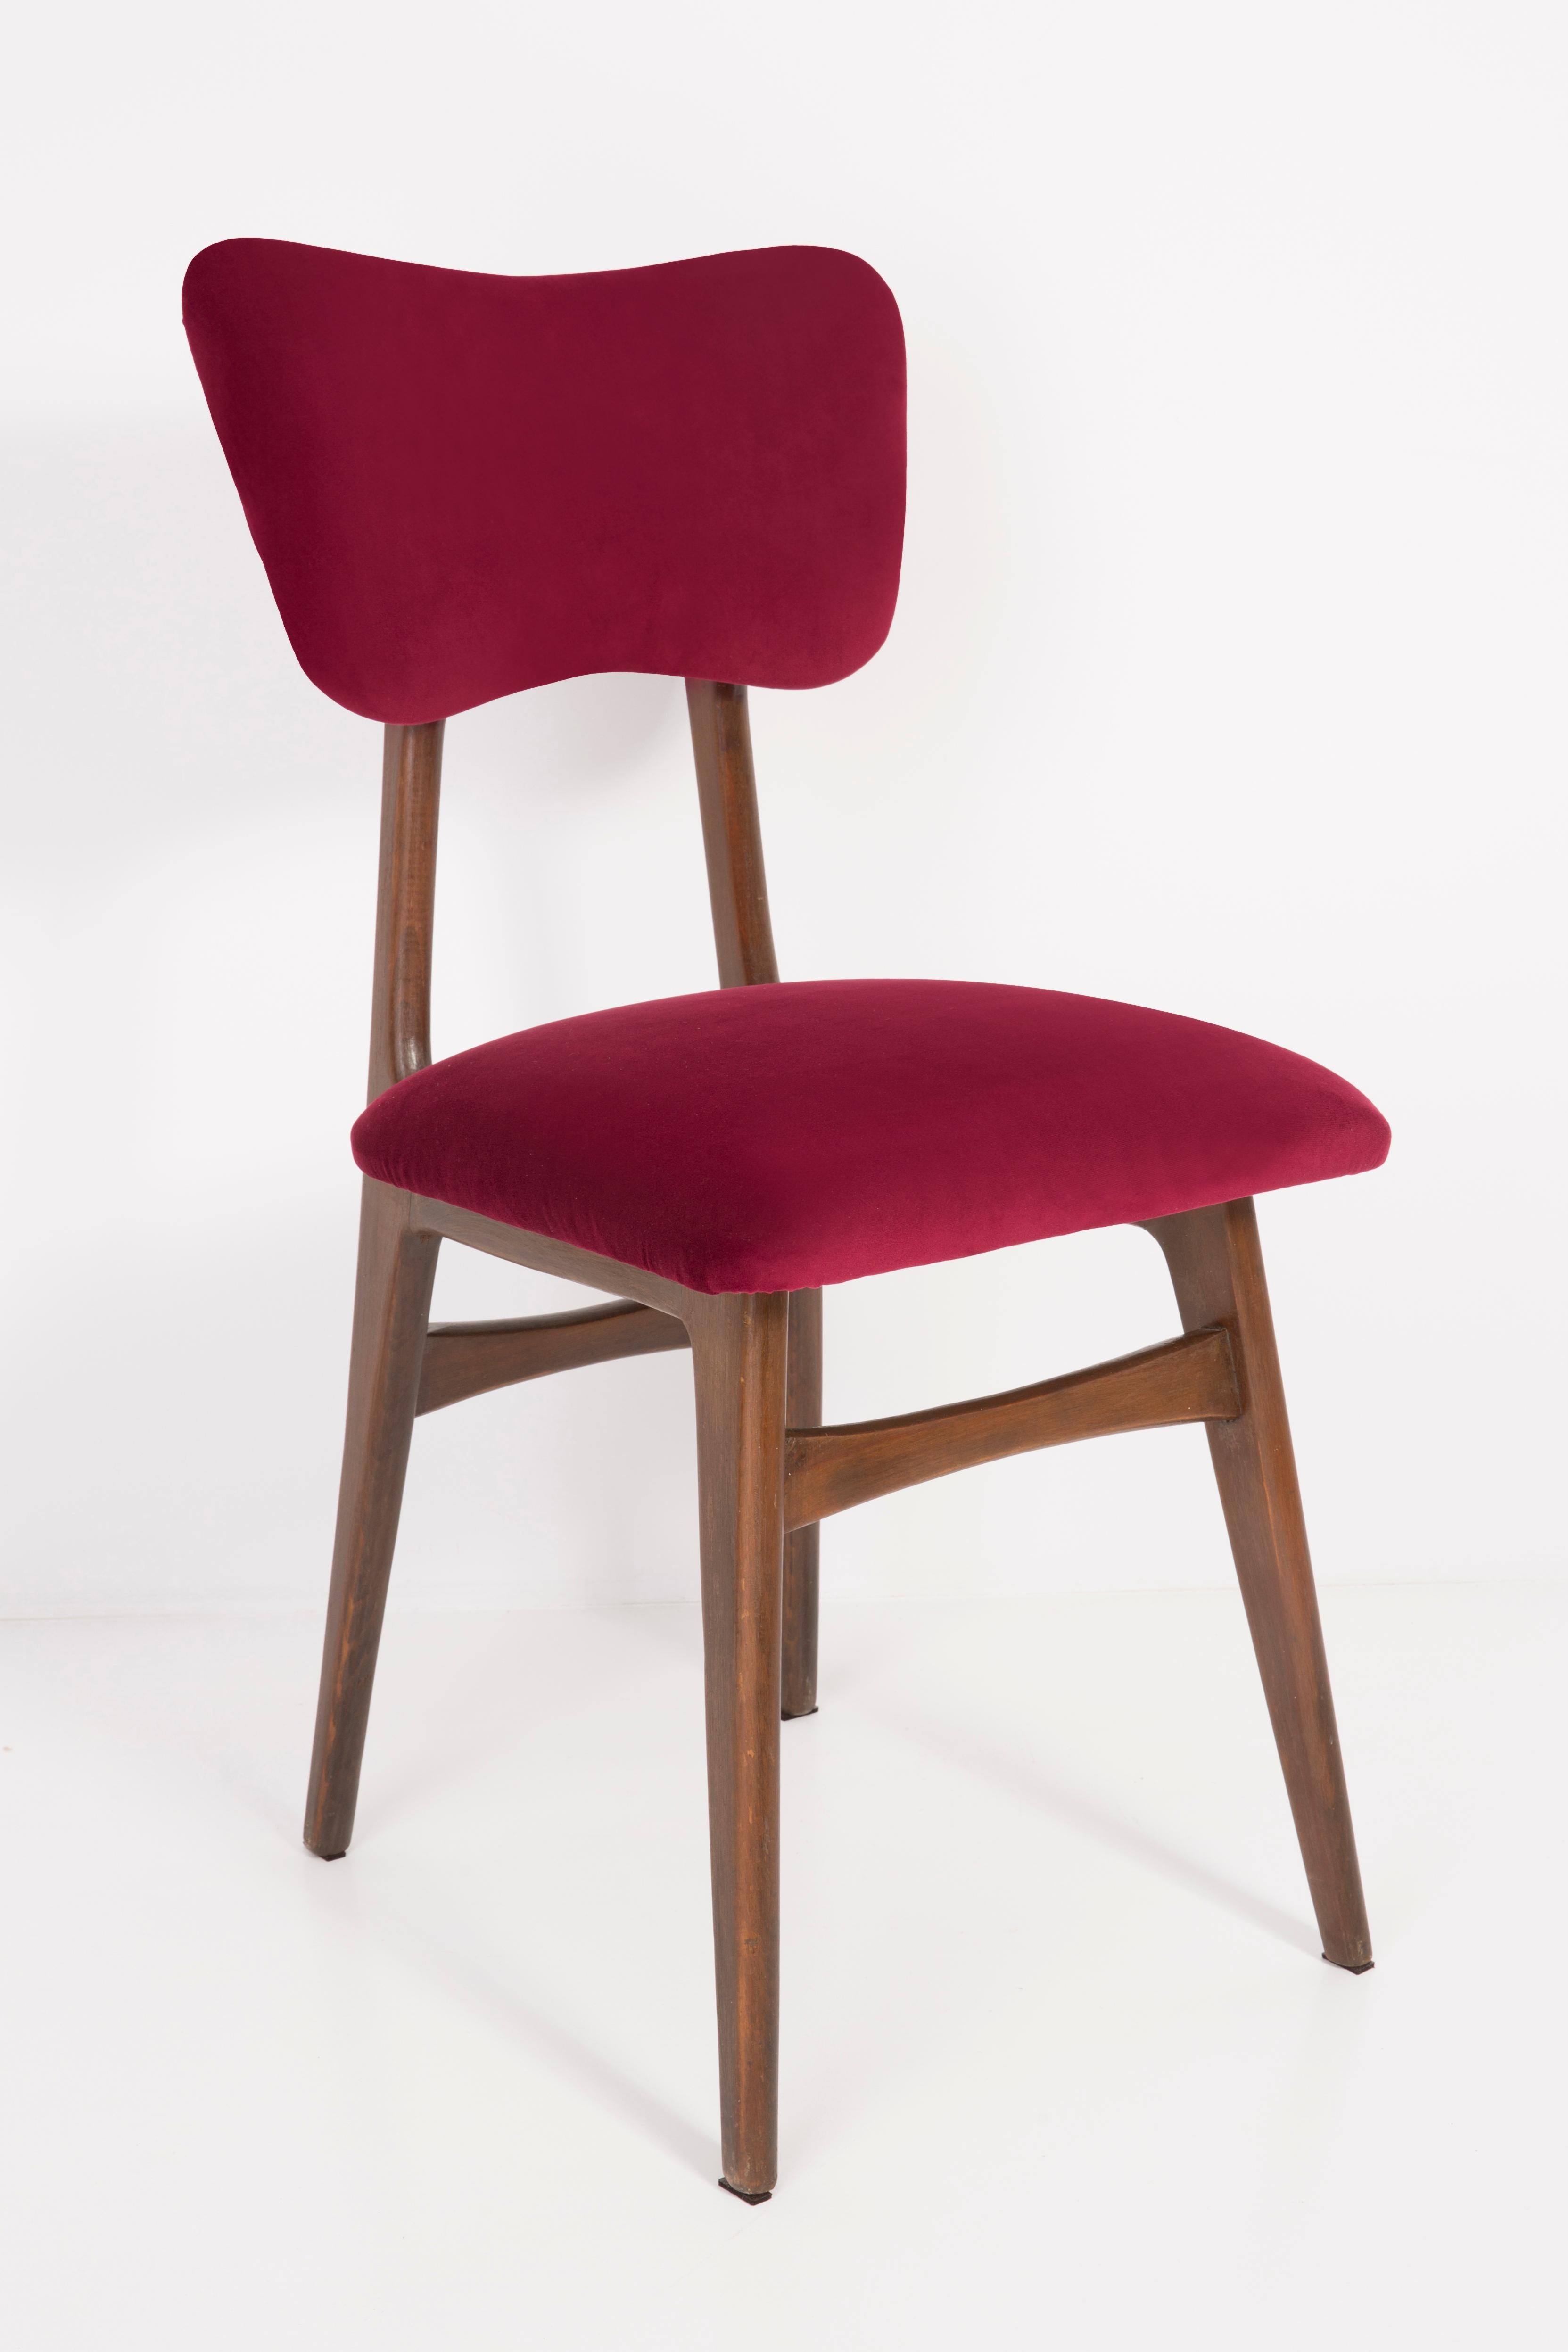 Woodwork Set of Twelve 20th Century Burgundy Red Chairs, 1960s For Sale